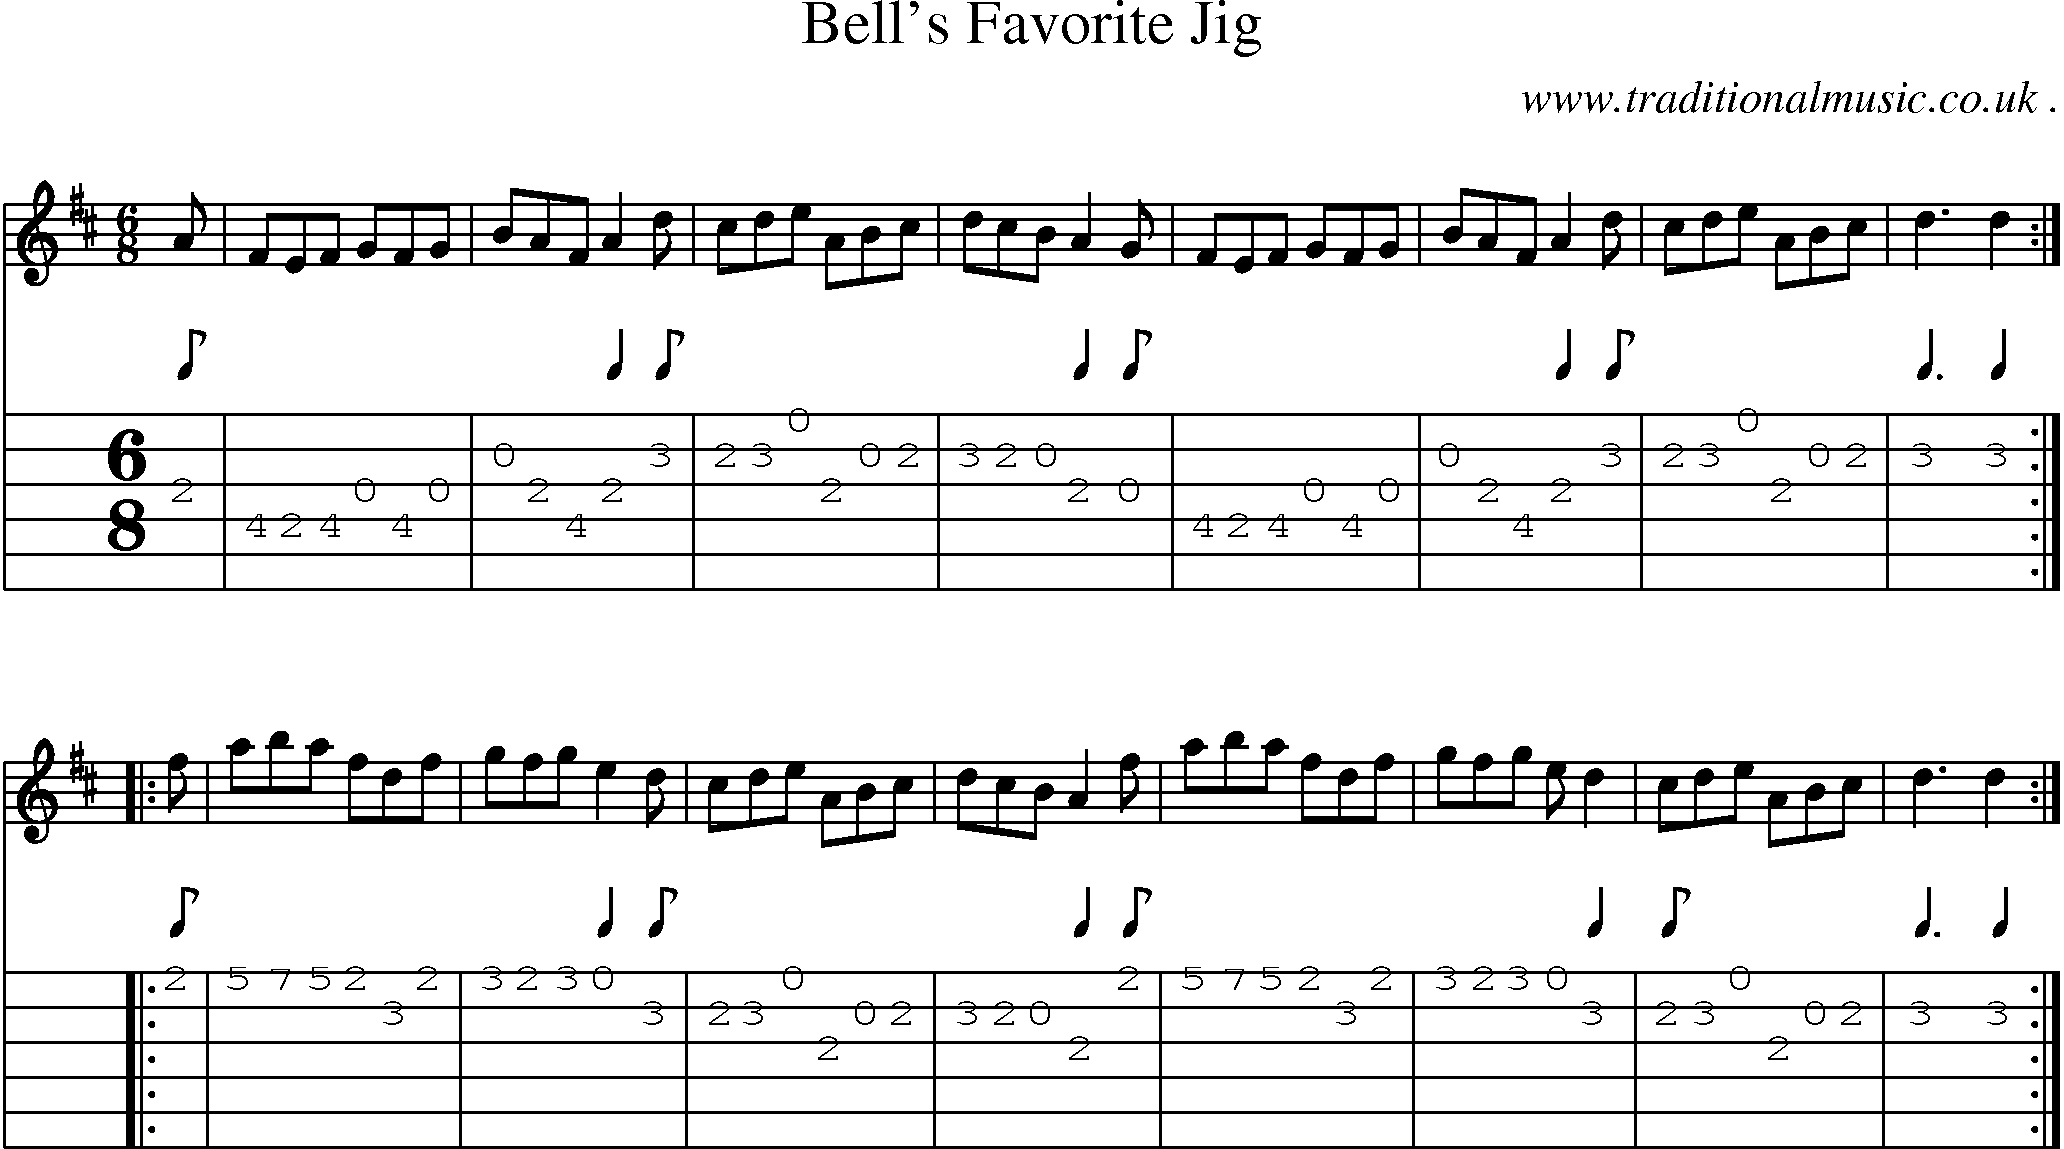 Sheet-music  score, Chords and Guitar Tabs for Bells Favorite Jig